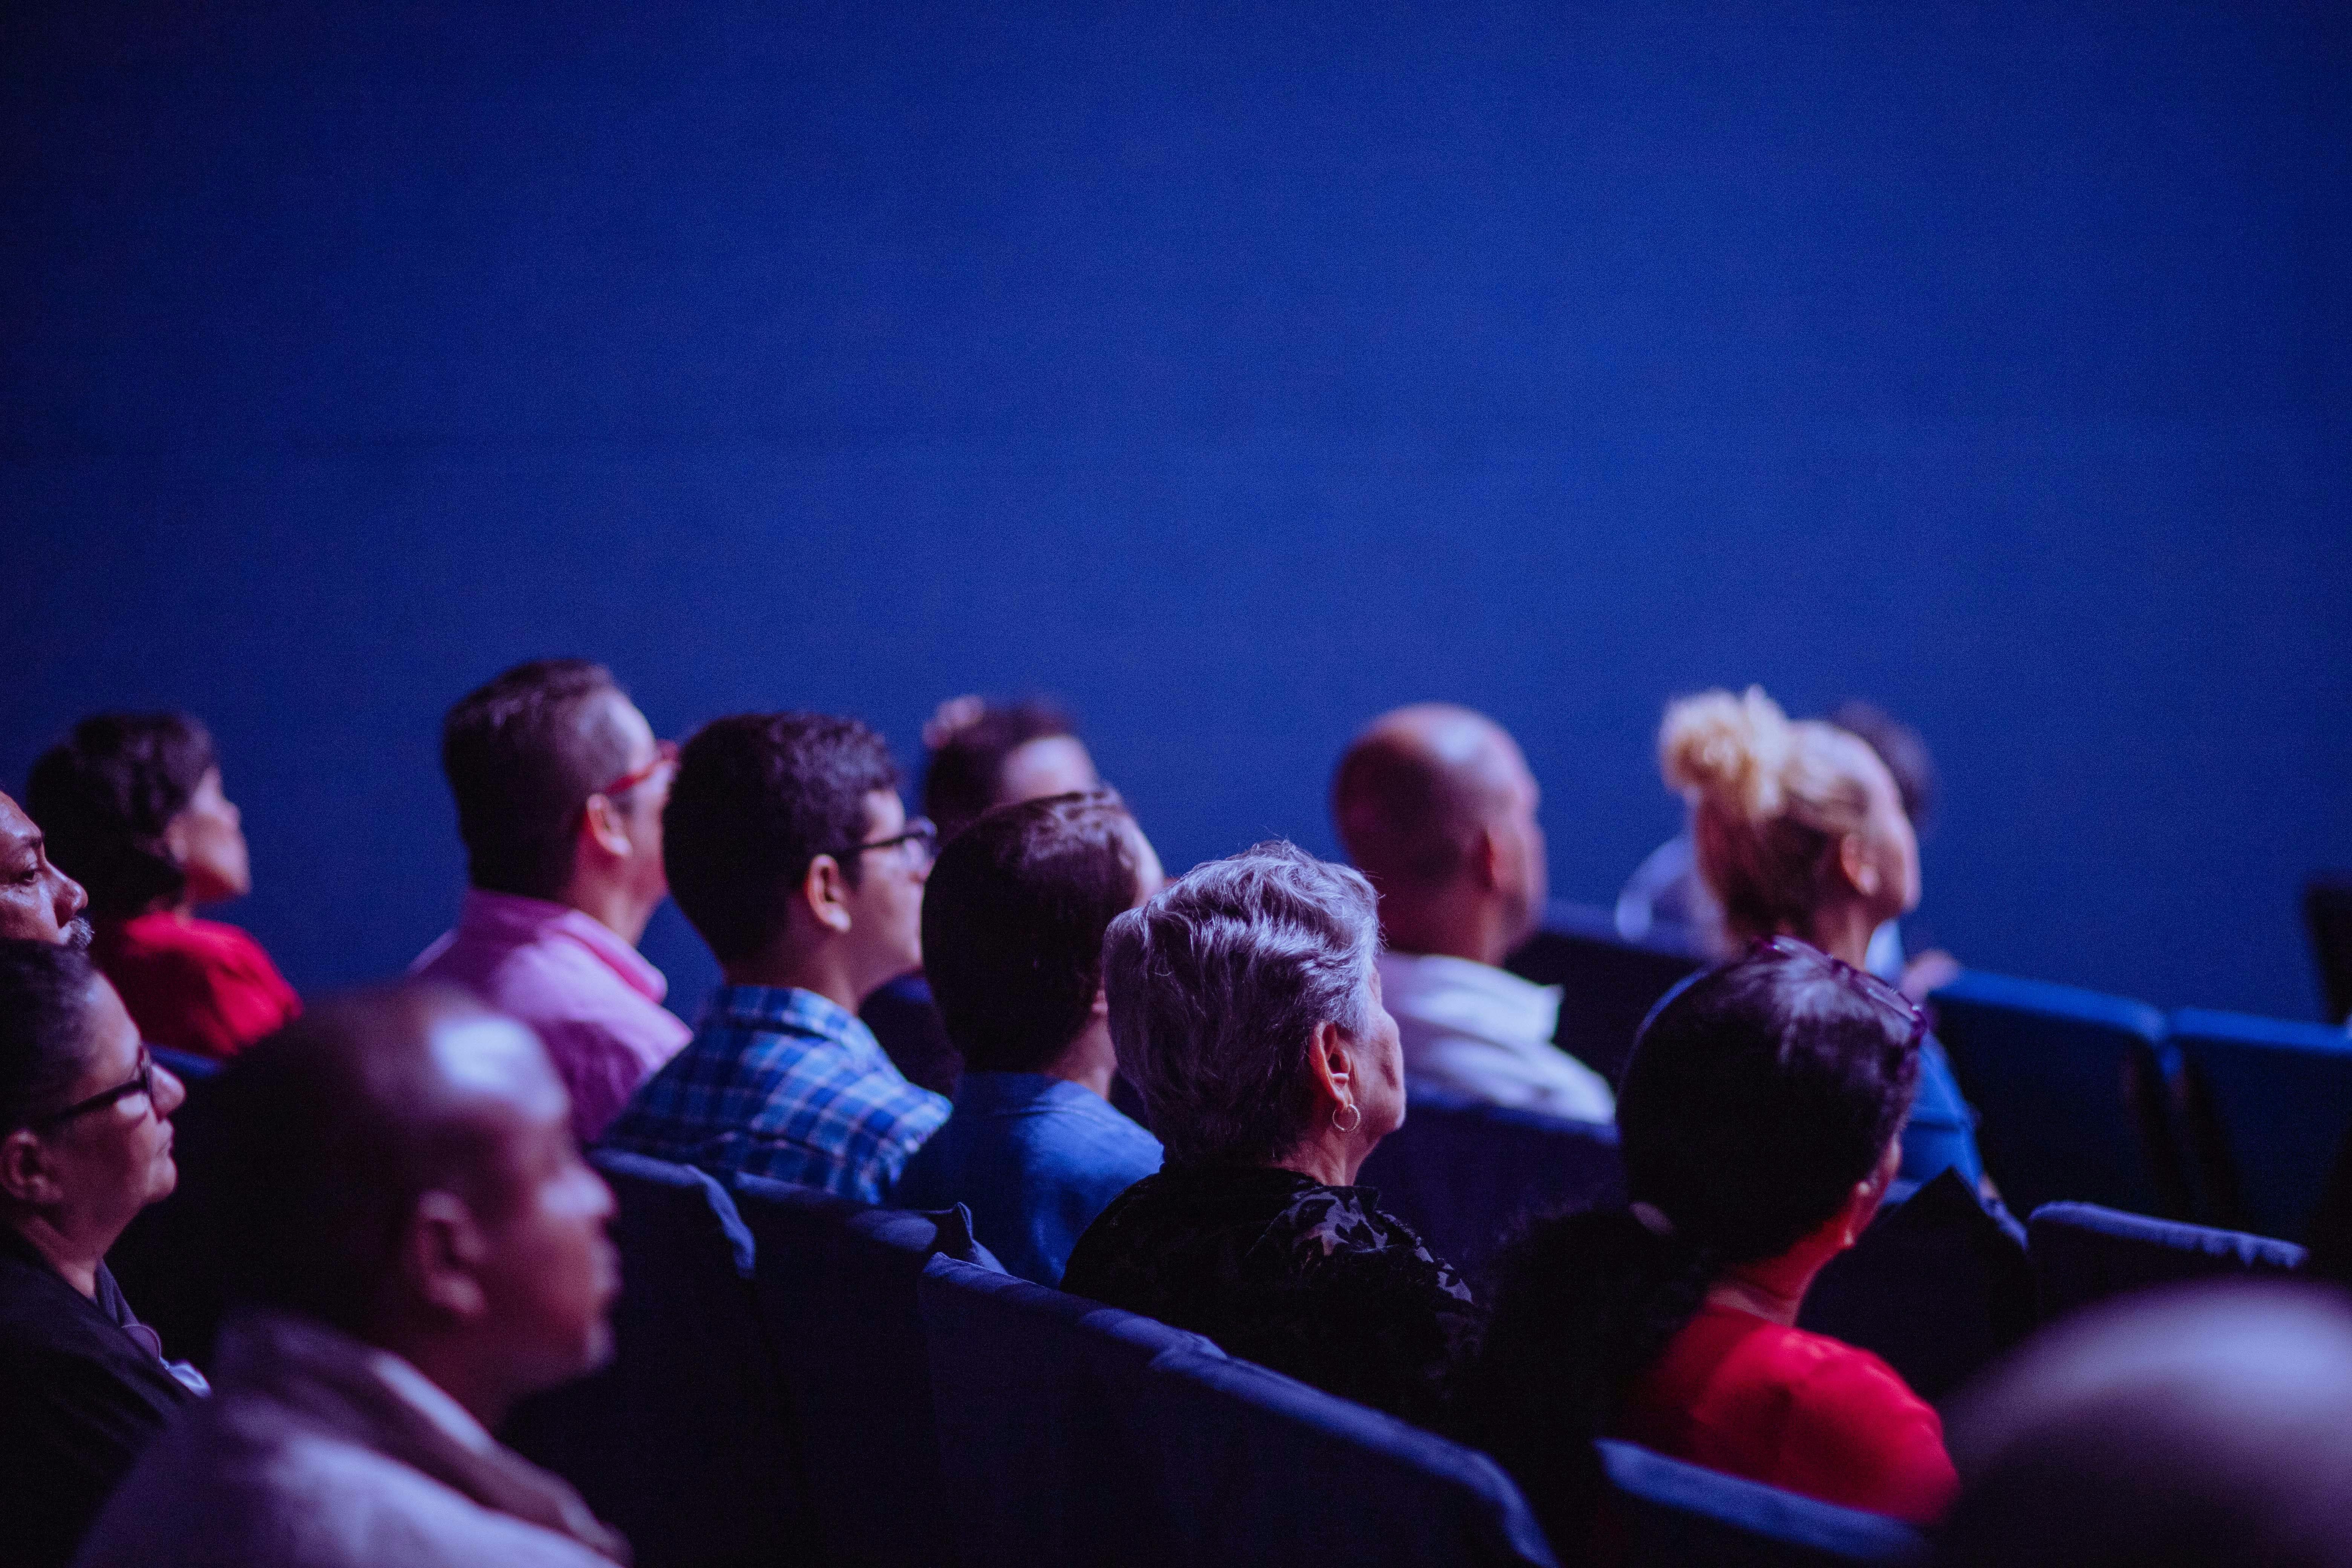 A photo of a group of people watching a movie to represent the film industry's connection to transmedia storytelling that transmedia franchises engage in. 